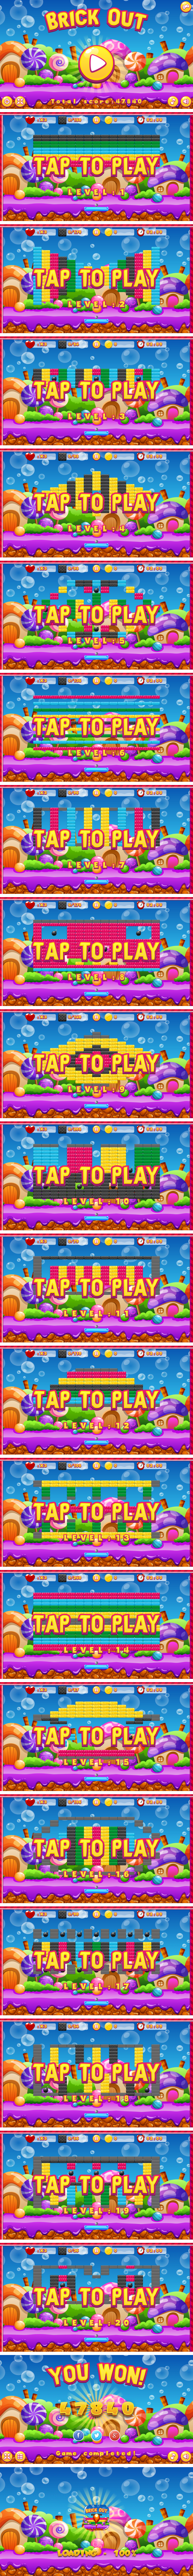 Brick Out - HTML5 Game, Mobile Version+AdMob!!! (Construct 3 | Construct 2 | Capx) - 3